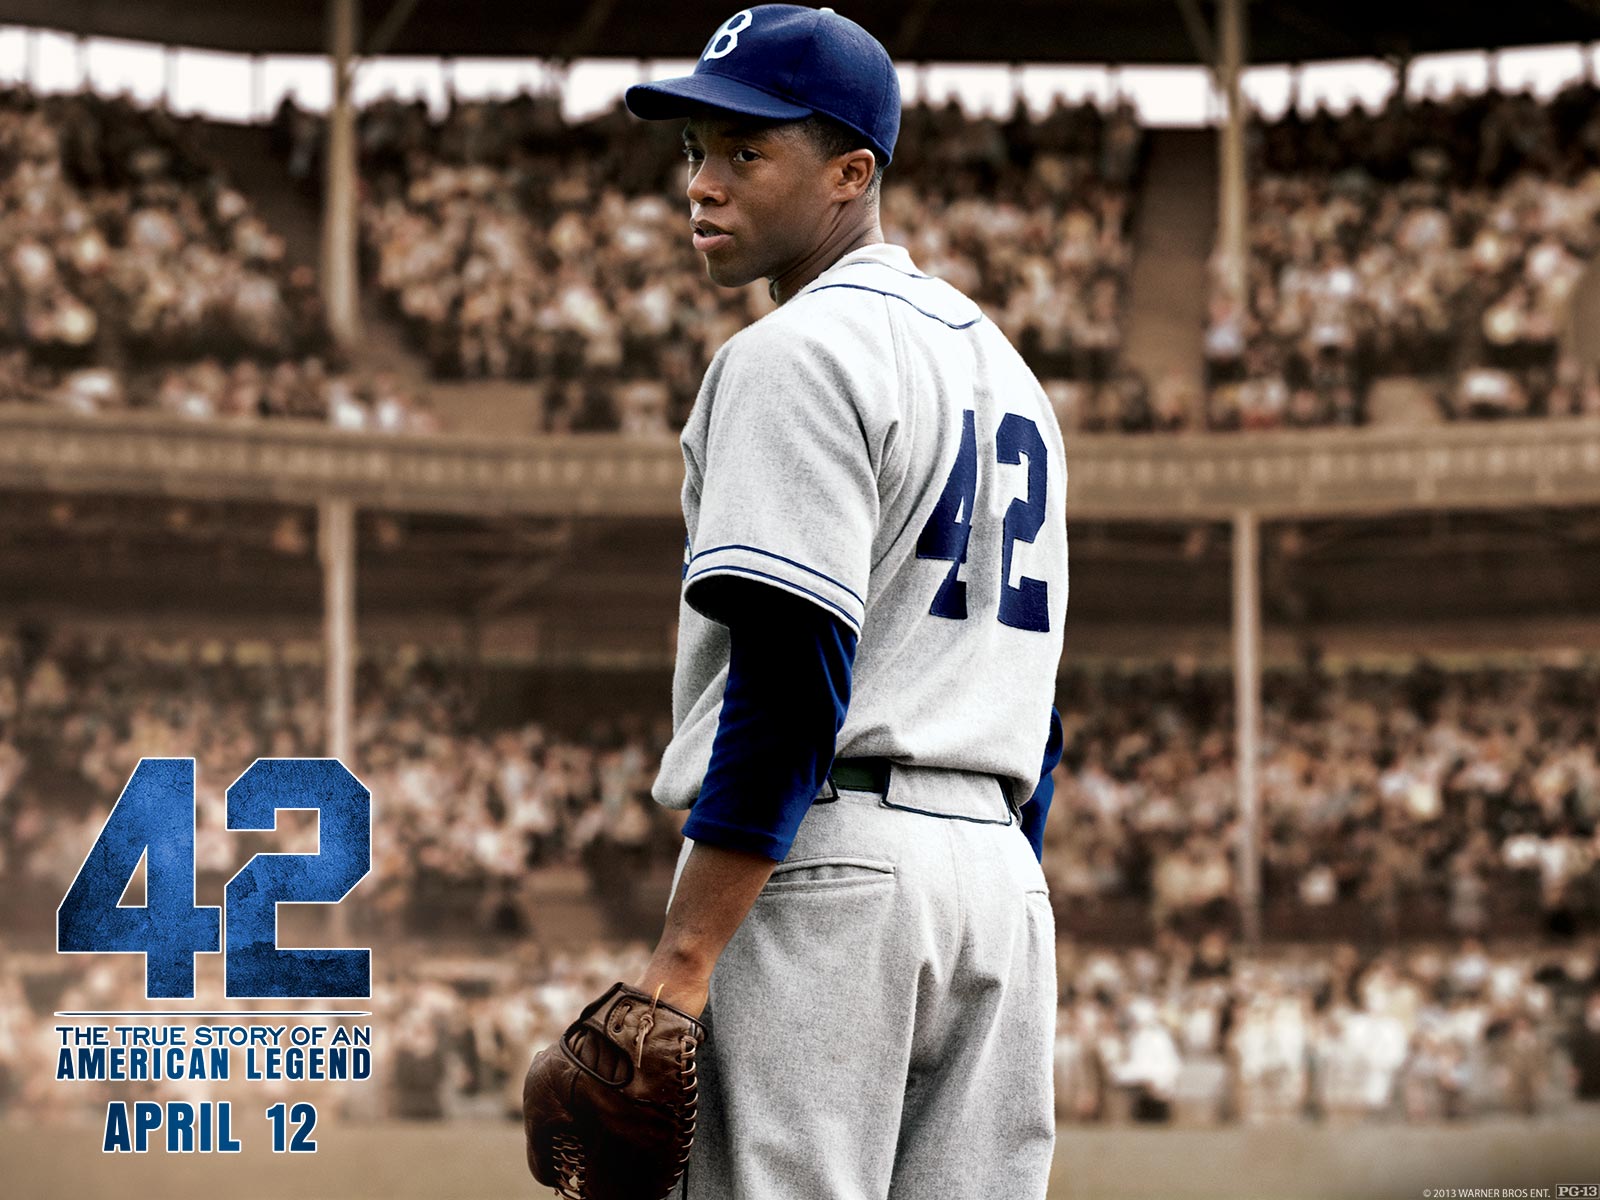 Jackie Robinson's Faith Missing From '42' Movie | Sojourners